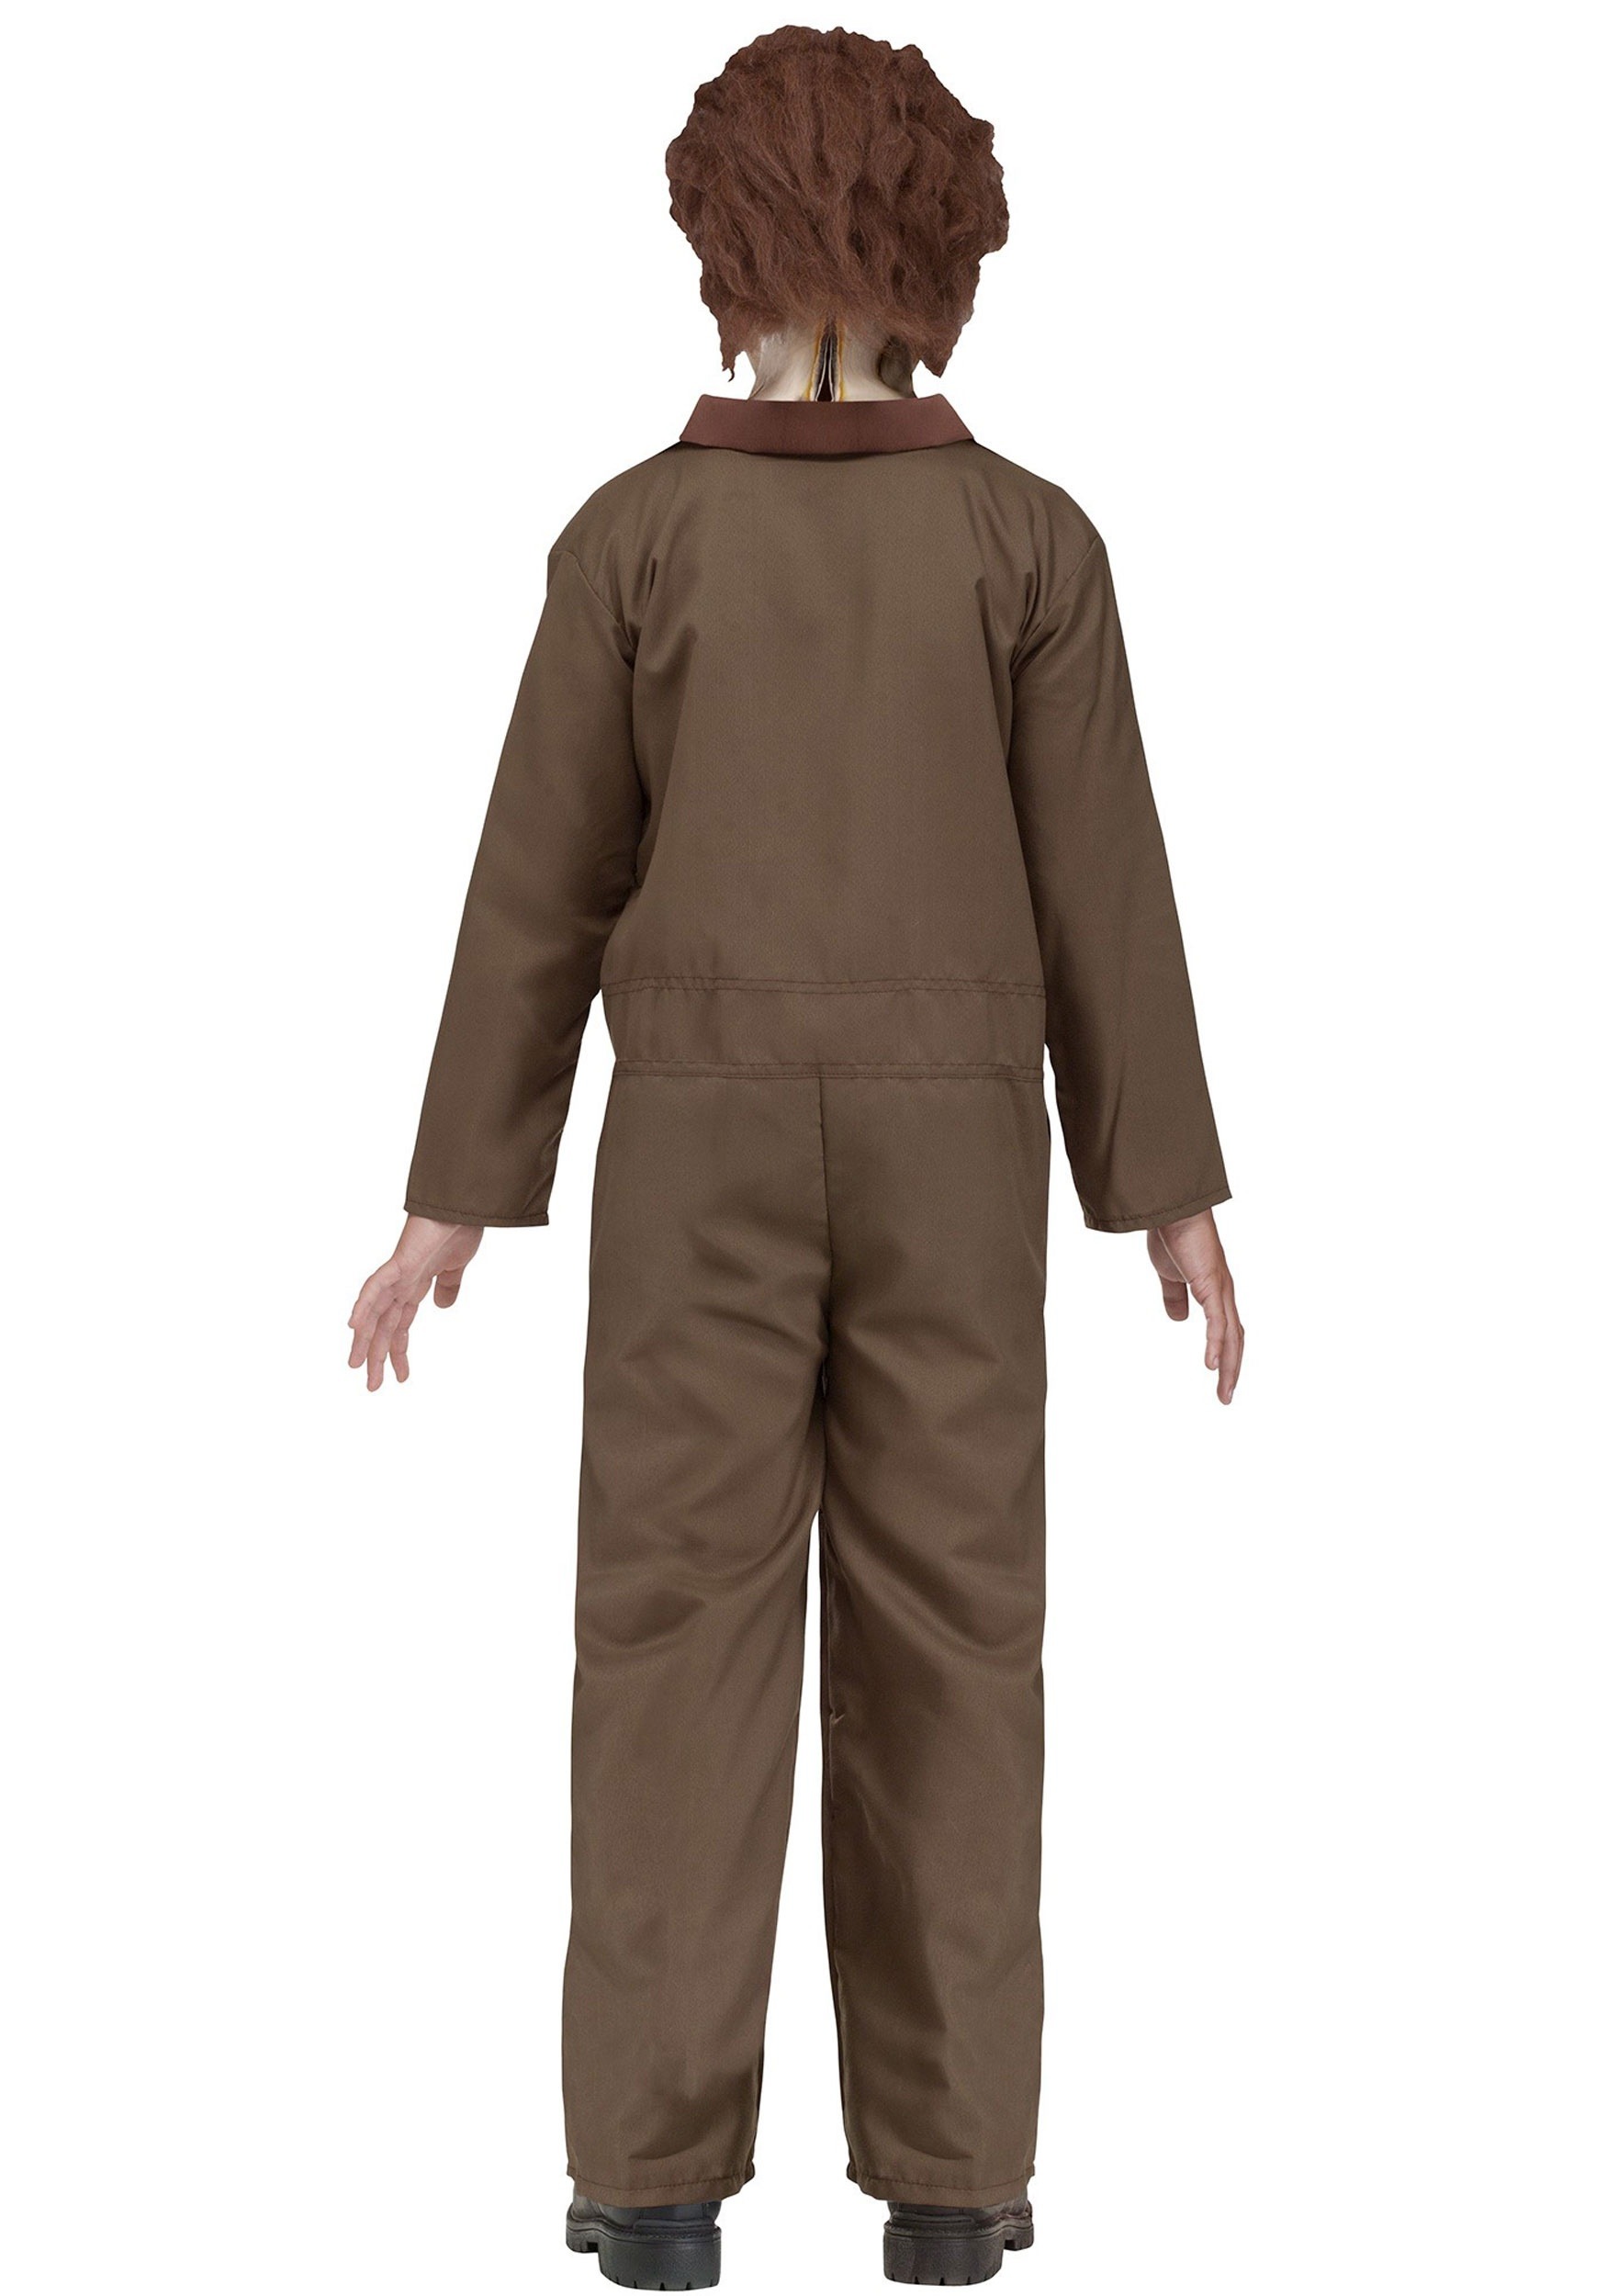 Rob Zombie Halloween Michael Myers Costume For Kids